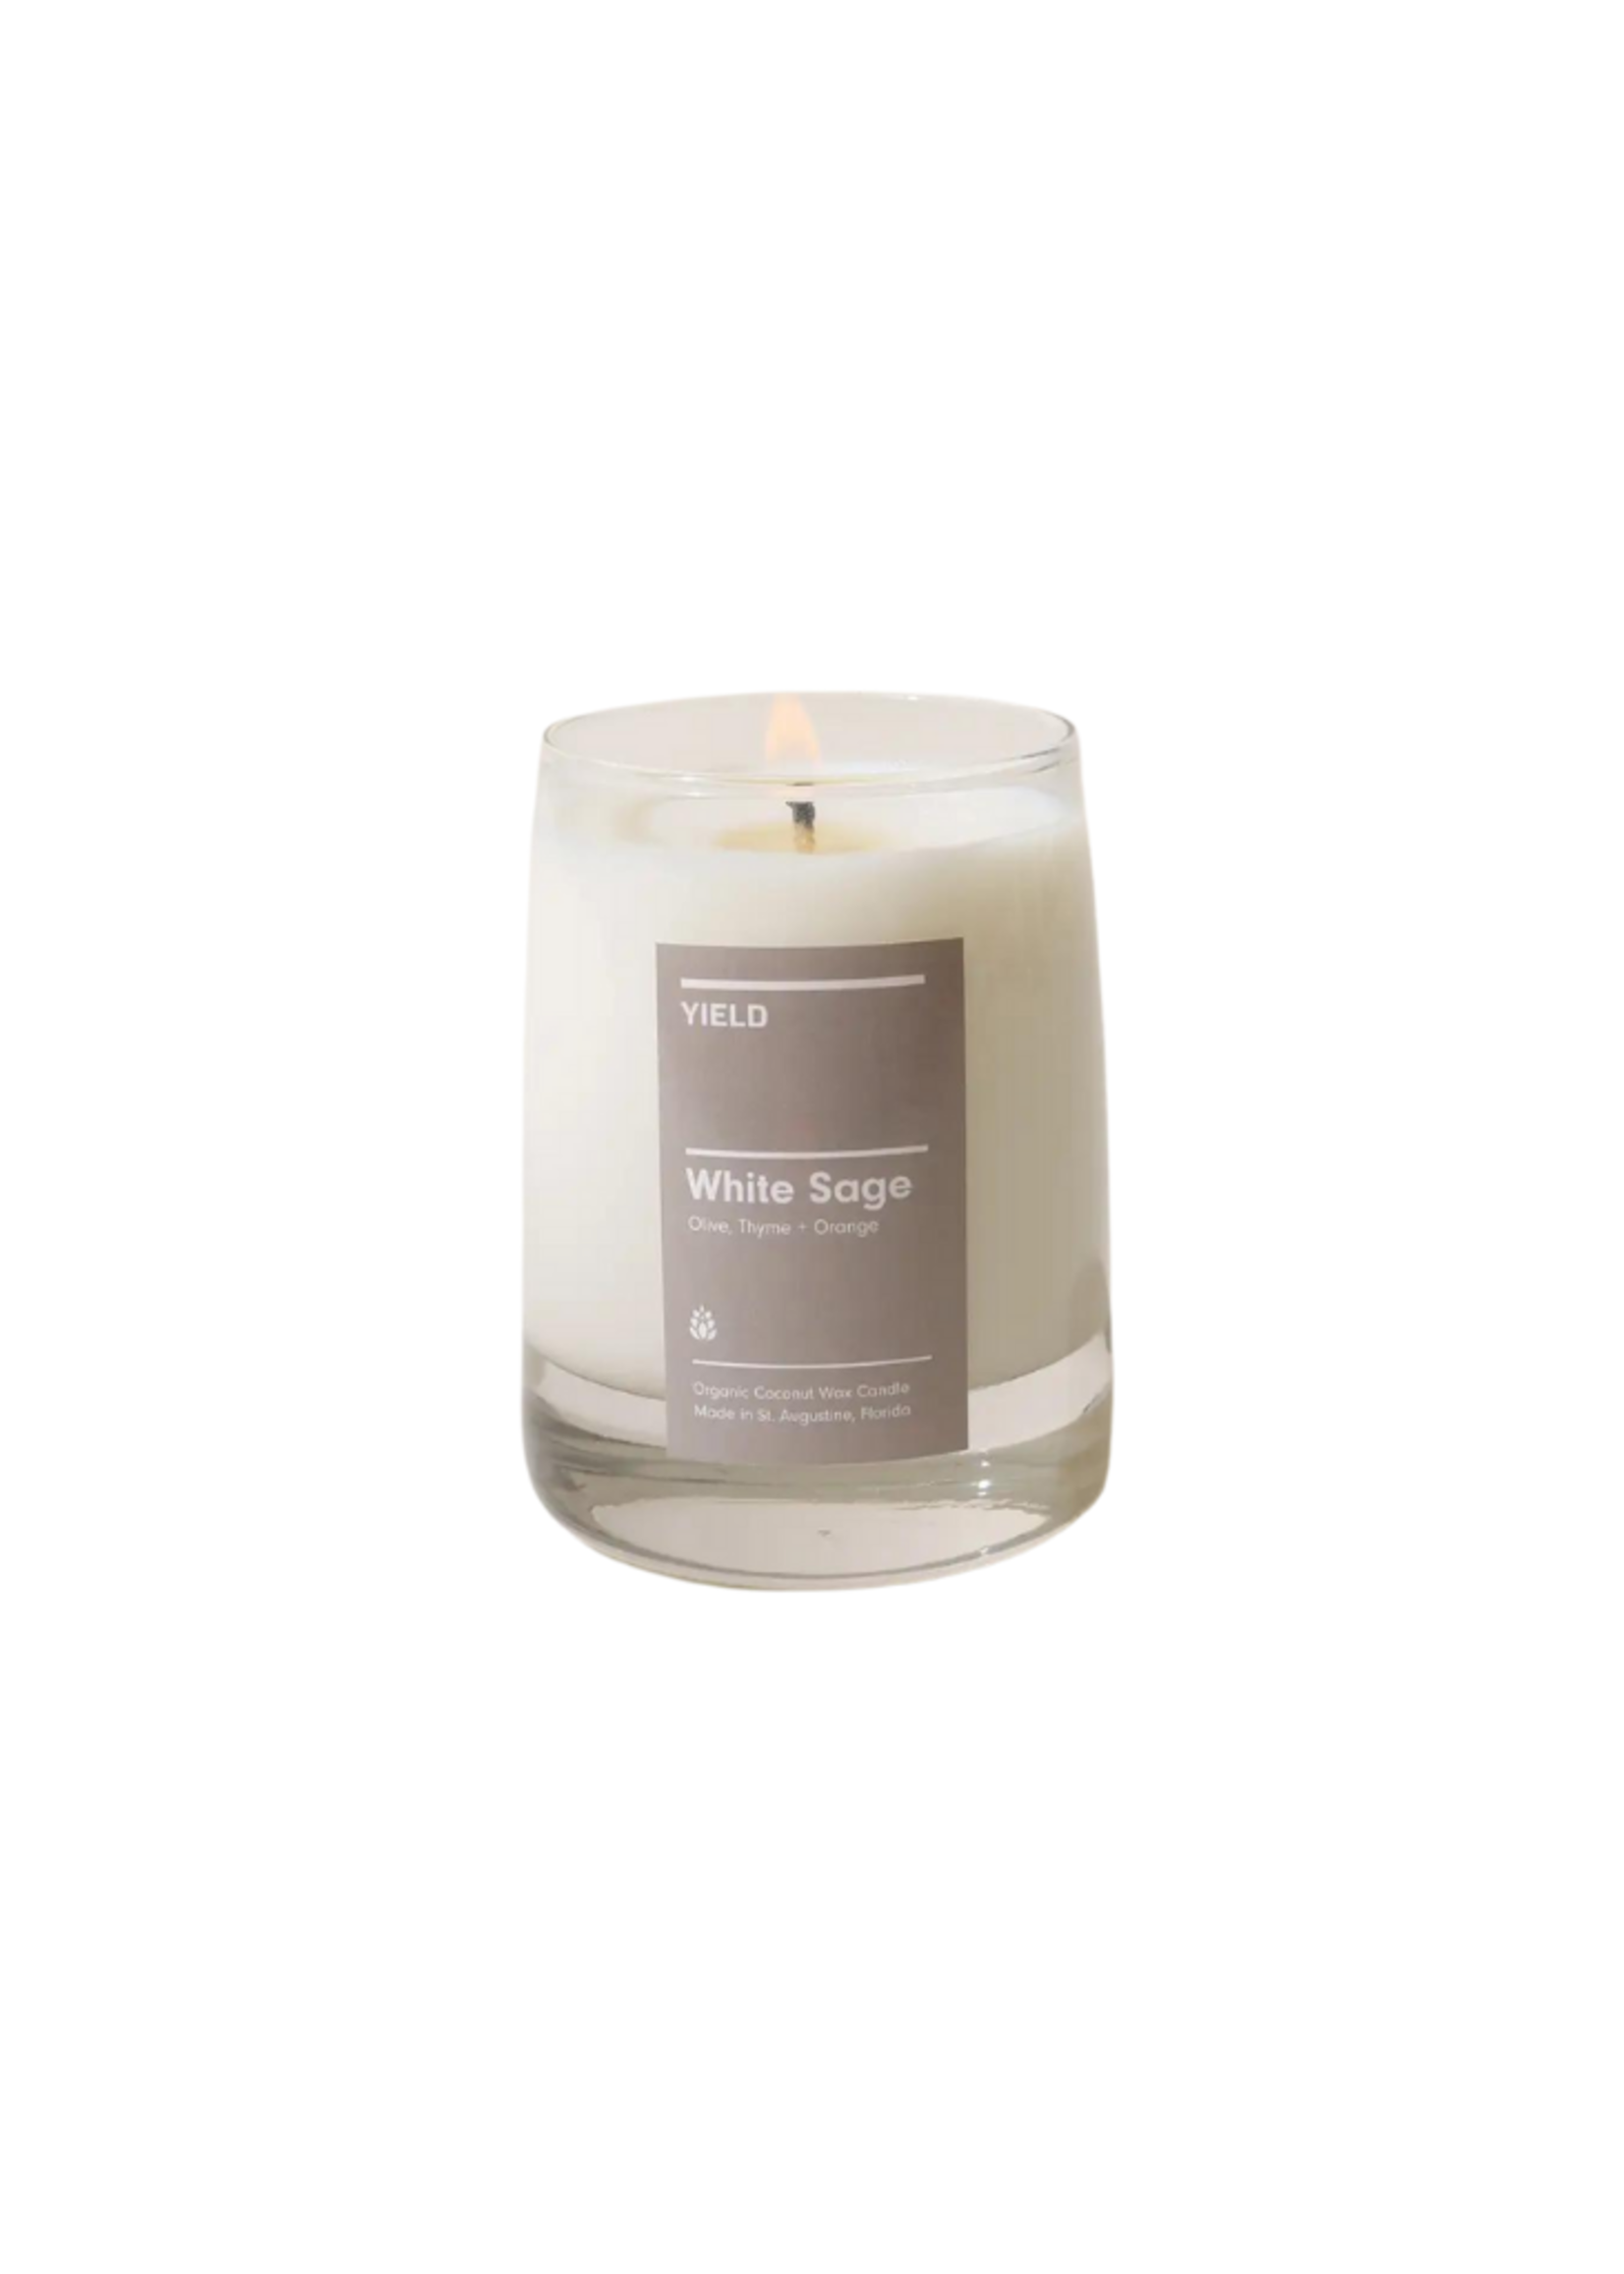 Yield Design Co White Sage Candle